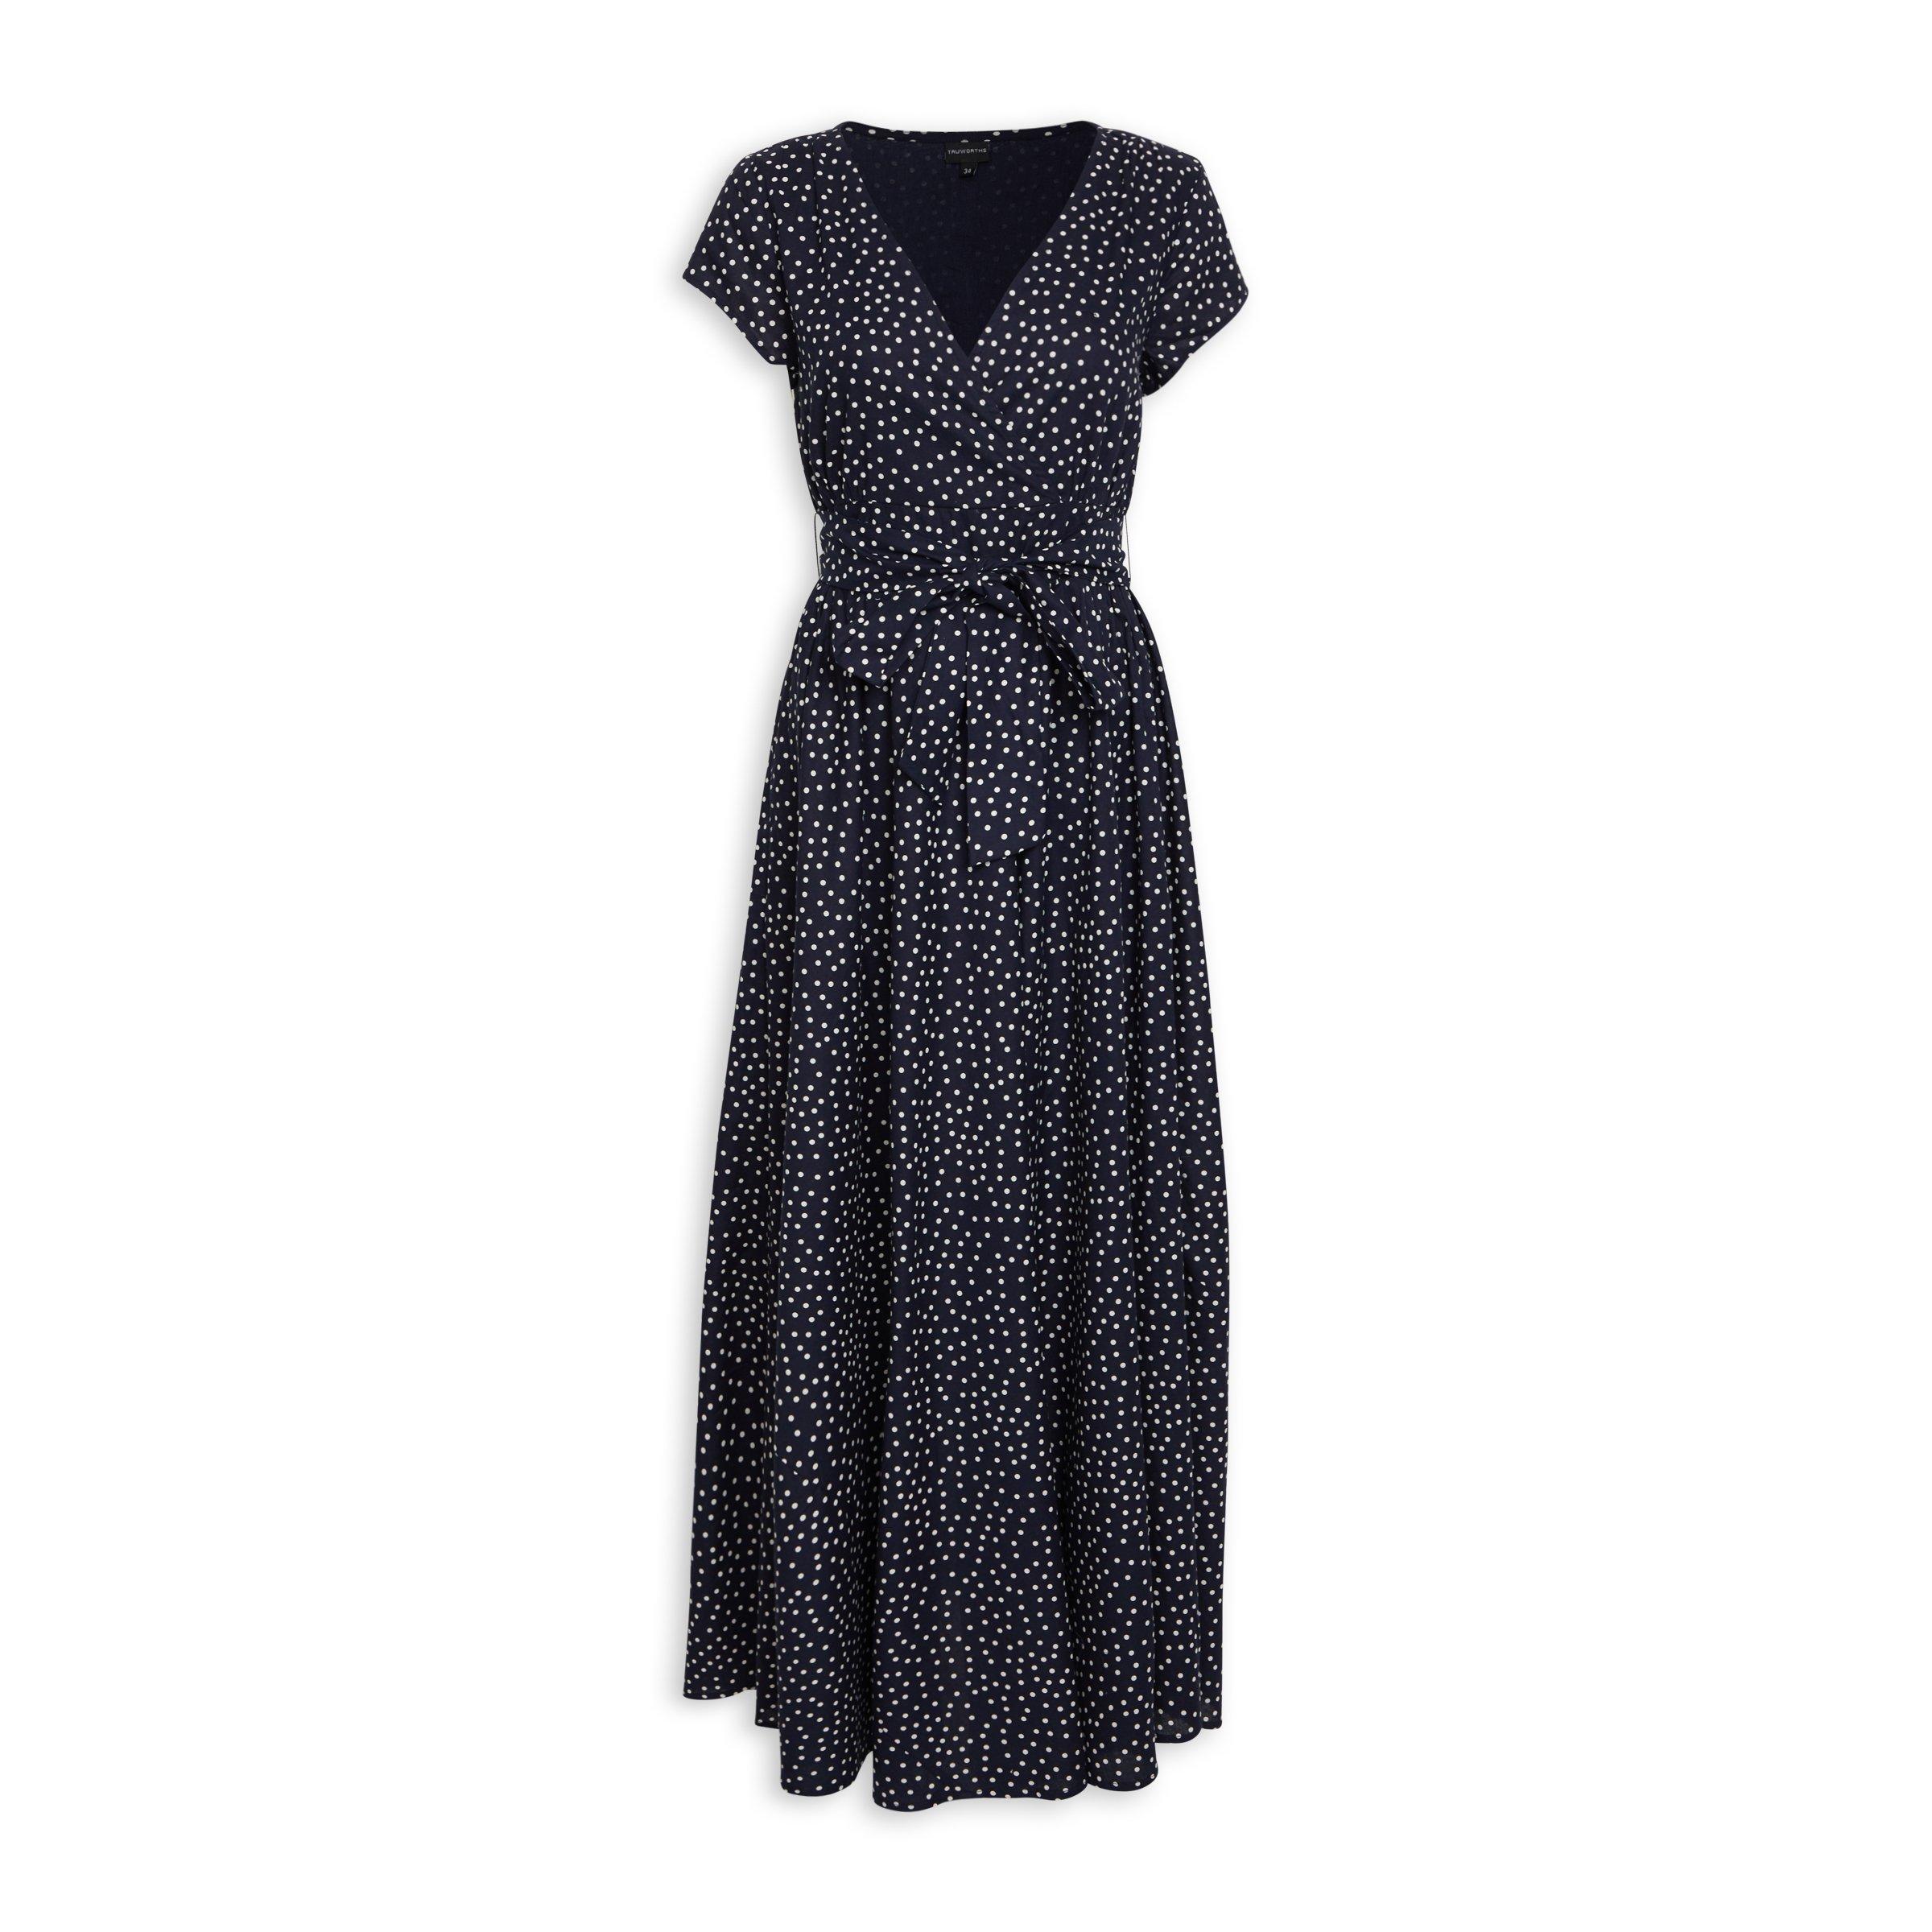 Buy Truworths Navy Fit And Flare Dress Online | Truworths